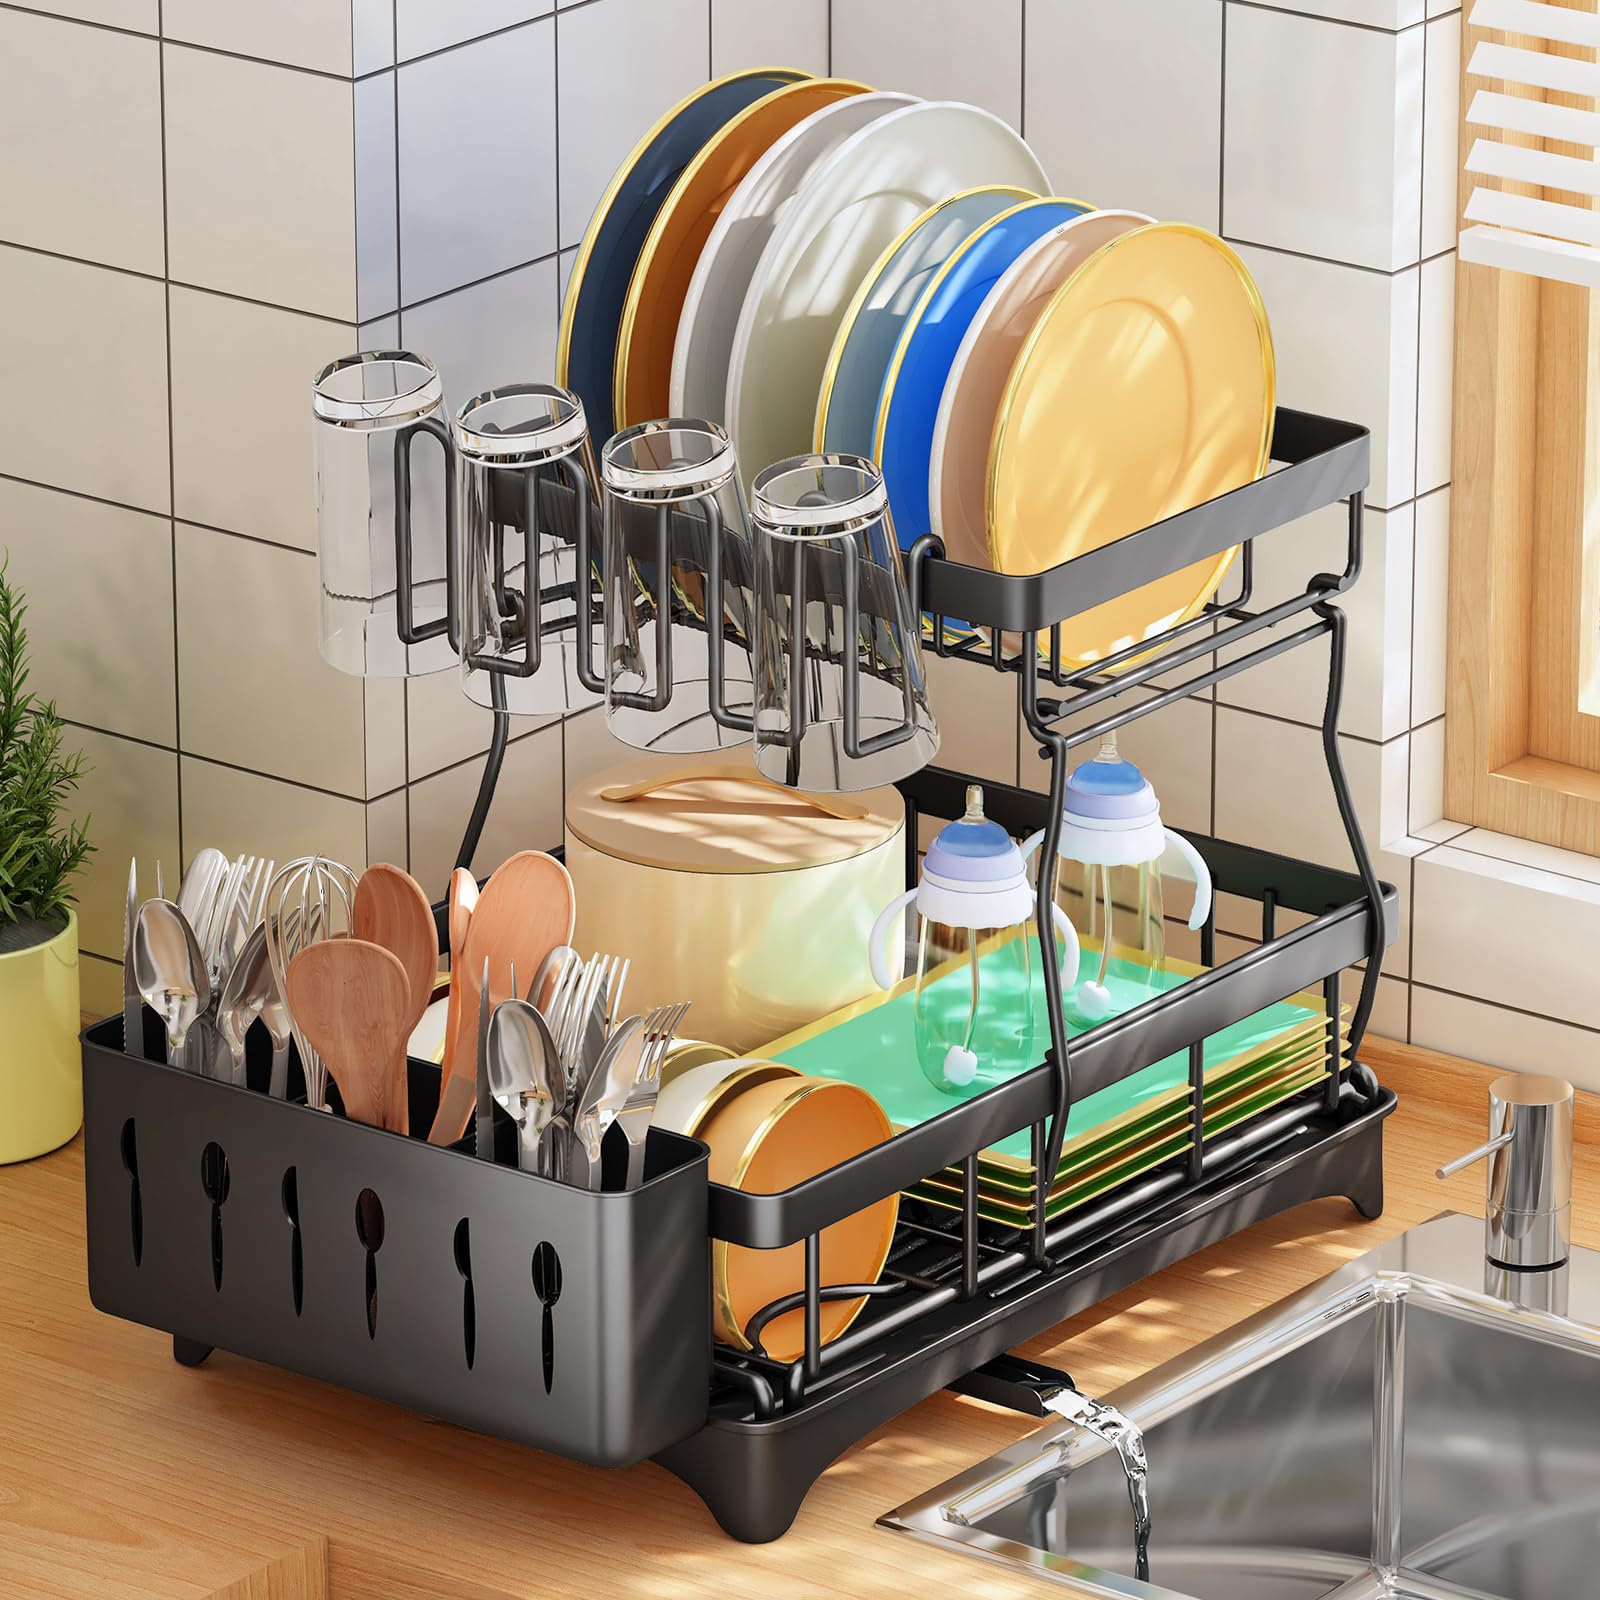 boosiny Large Dish Drying Rack with Drainboard Set, 2 Tier Dish Strainer  with Utensil and Cup